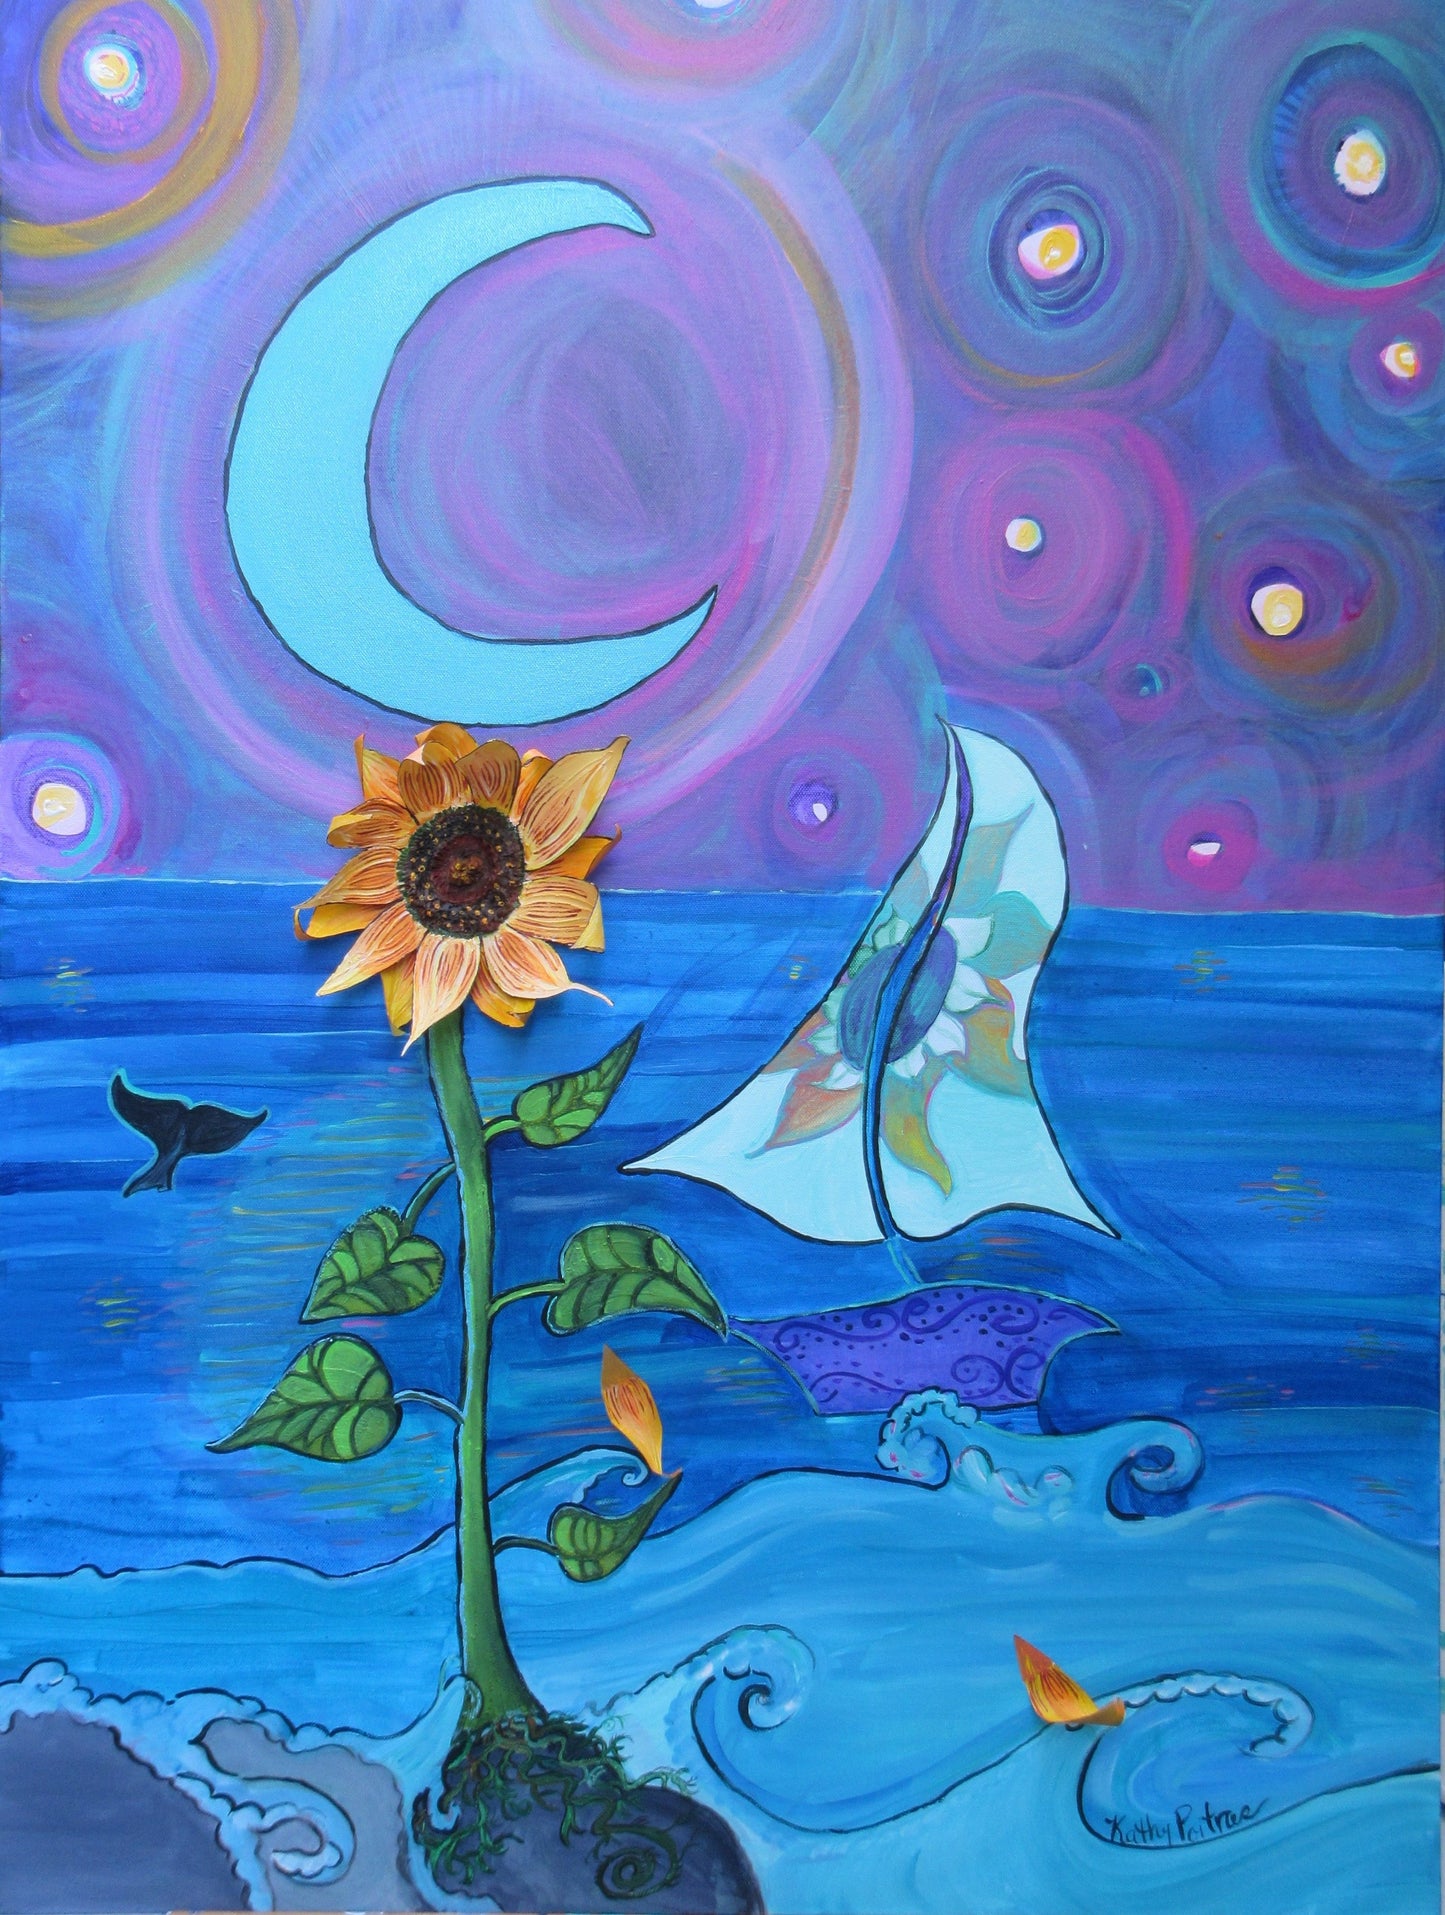 Whimsical  expressionist acrylic painting with 3D  sculpted sunflower made of molding paste and canvas. . A sunflower grown on the edge of the waves. It is night time, a wale tail and whimsical sail boat are on the water, there are orbs in the night sky and a blue crescent moon.